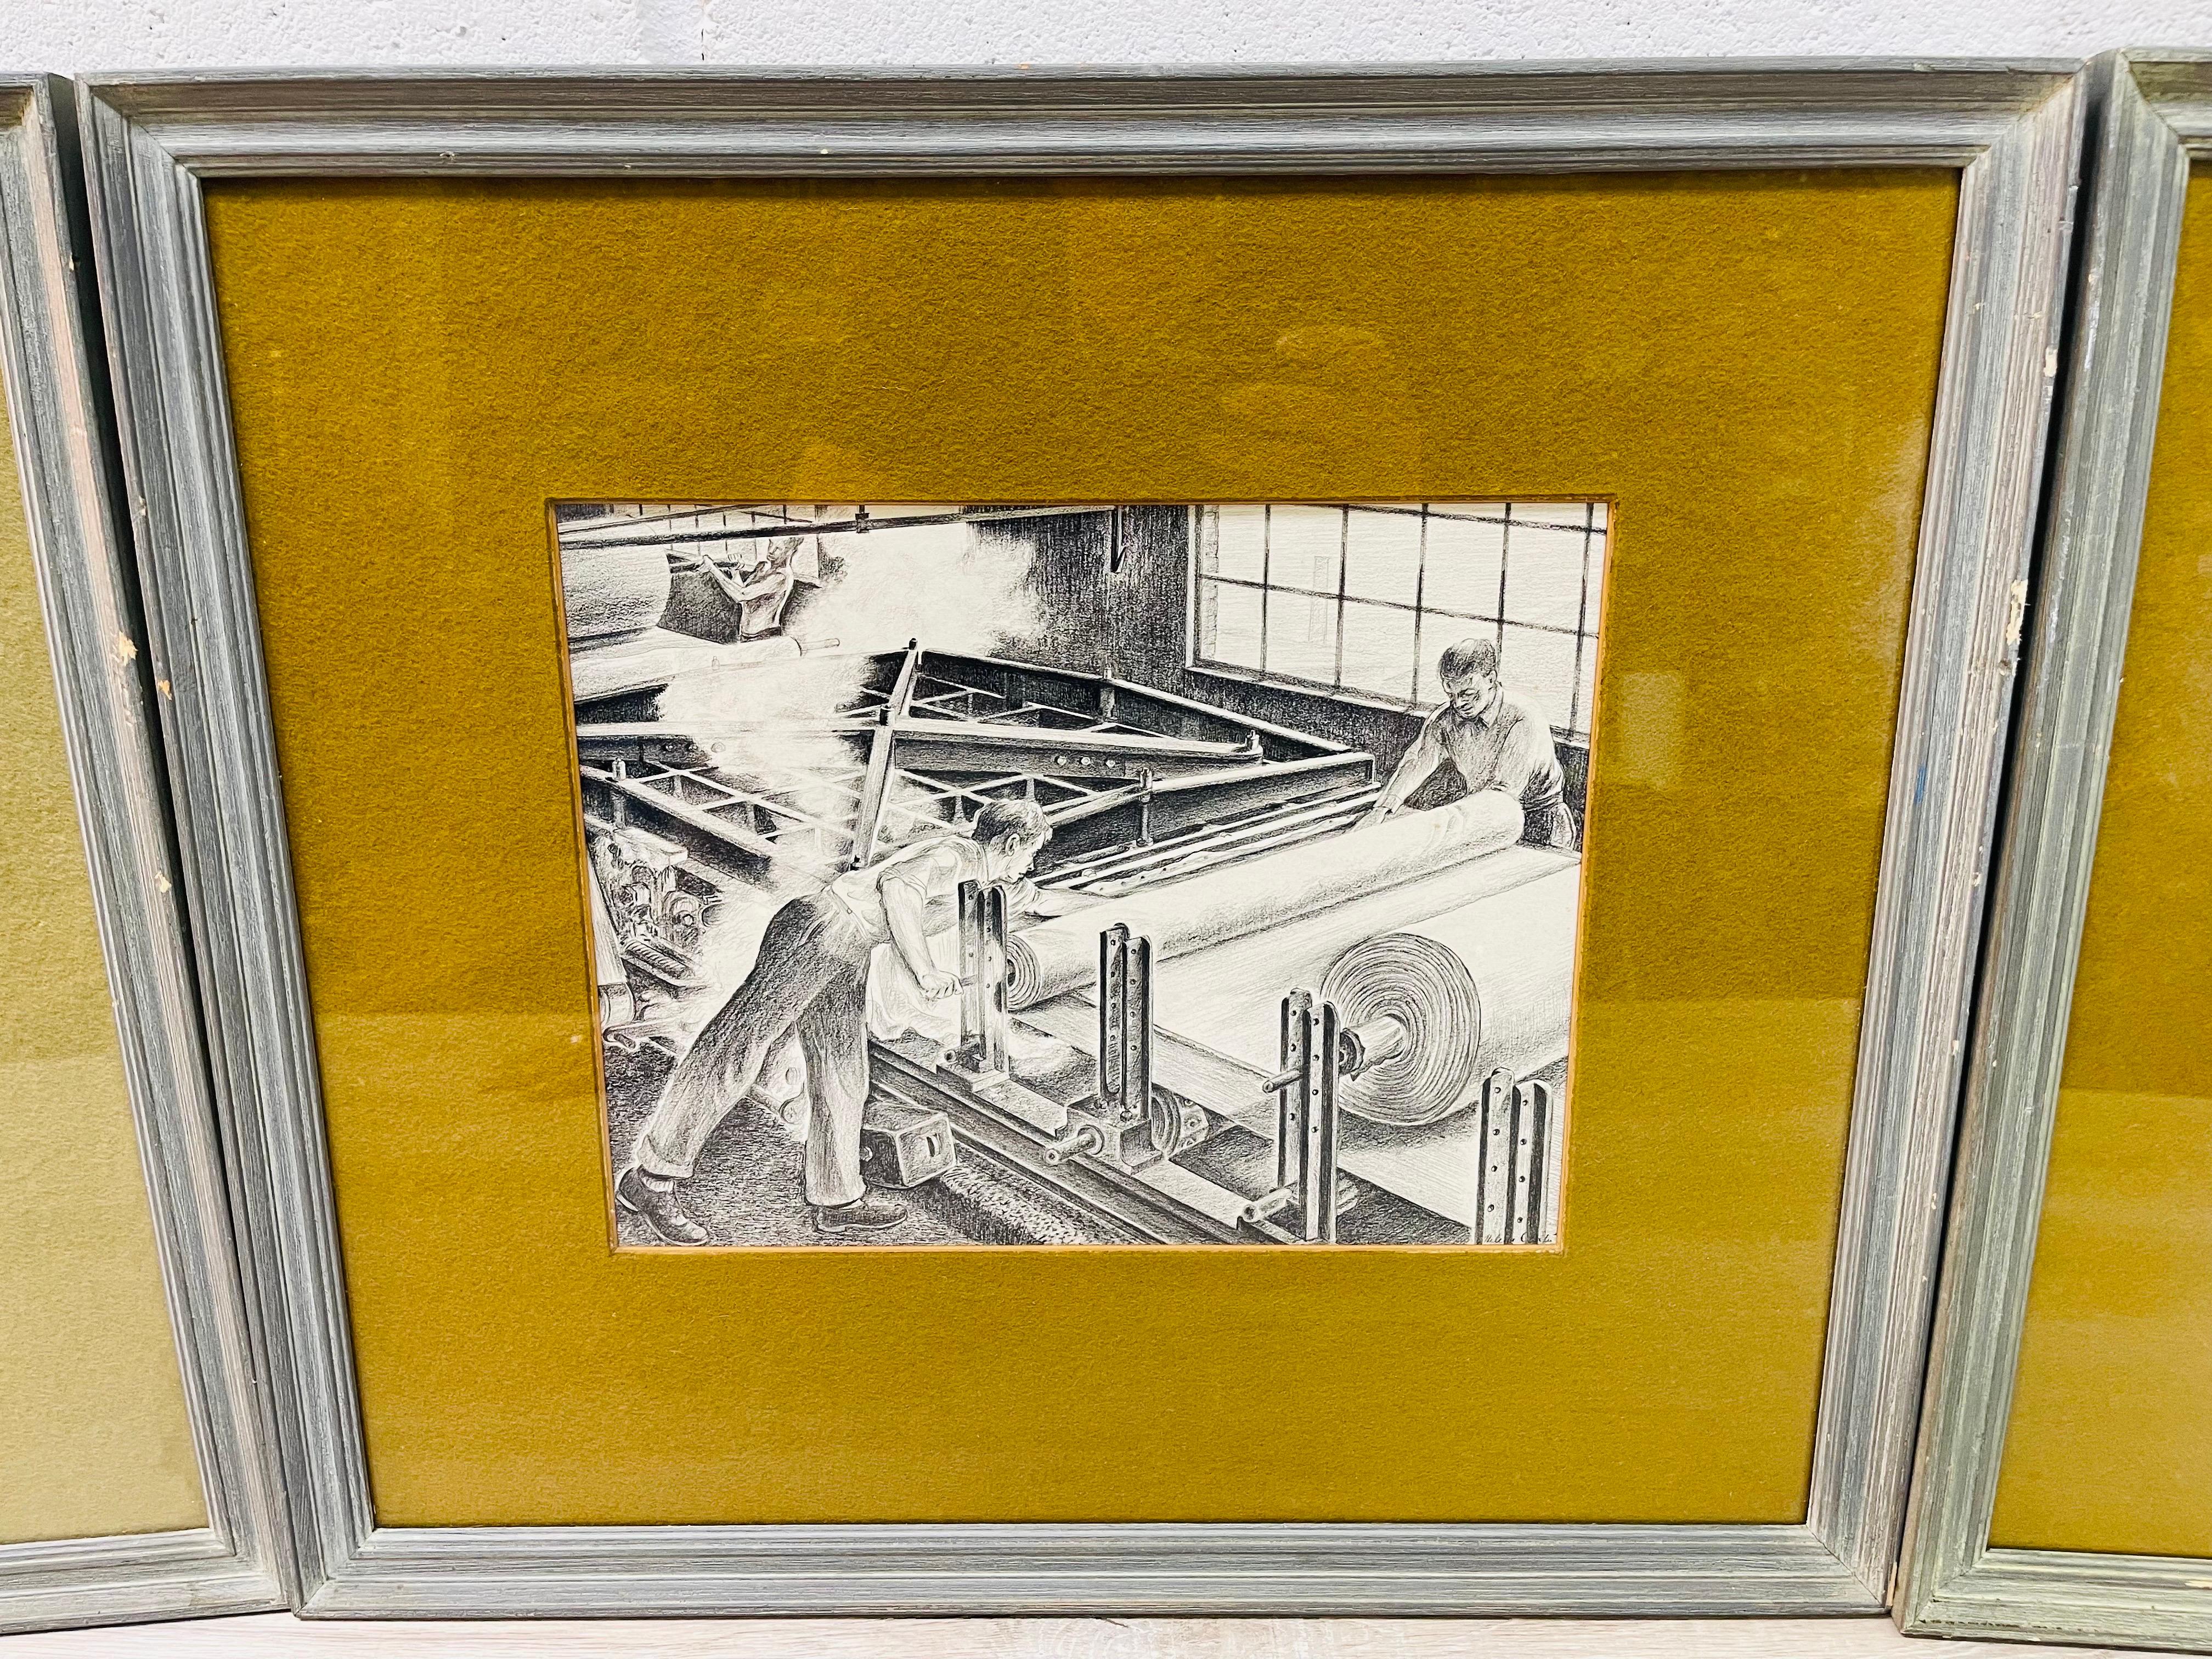 Vintage 1960s set of three framed Industrial scene wall prints. The prints show different parts of making industrial fabric in black and white. Matted in green with matching wood frames. The prints are well done with great detail. Marked: Helene